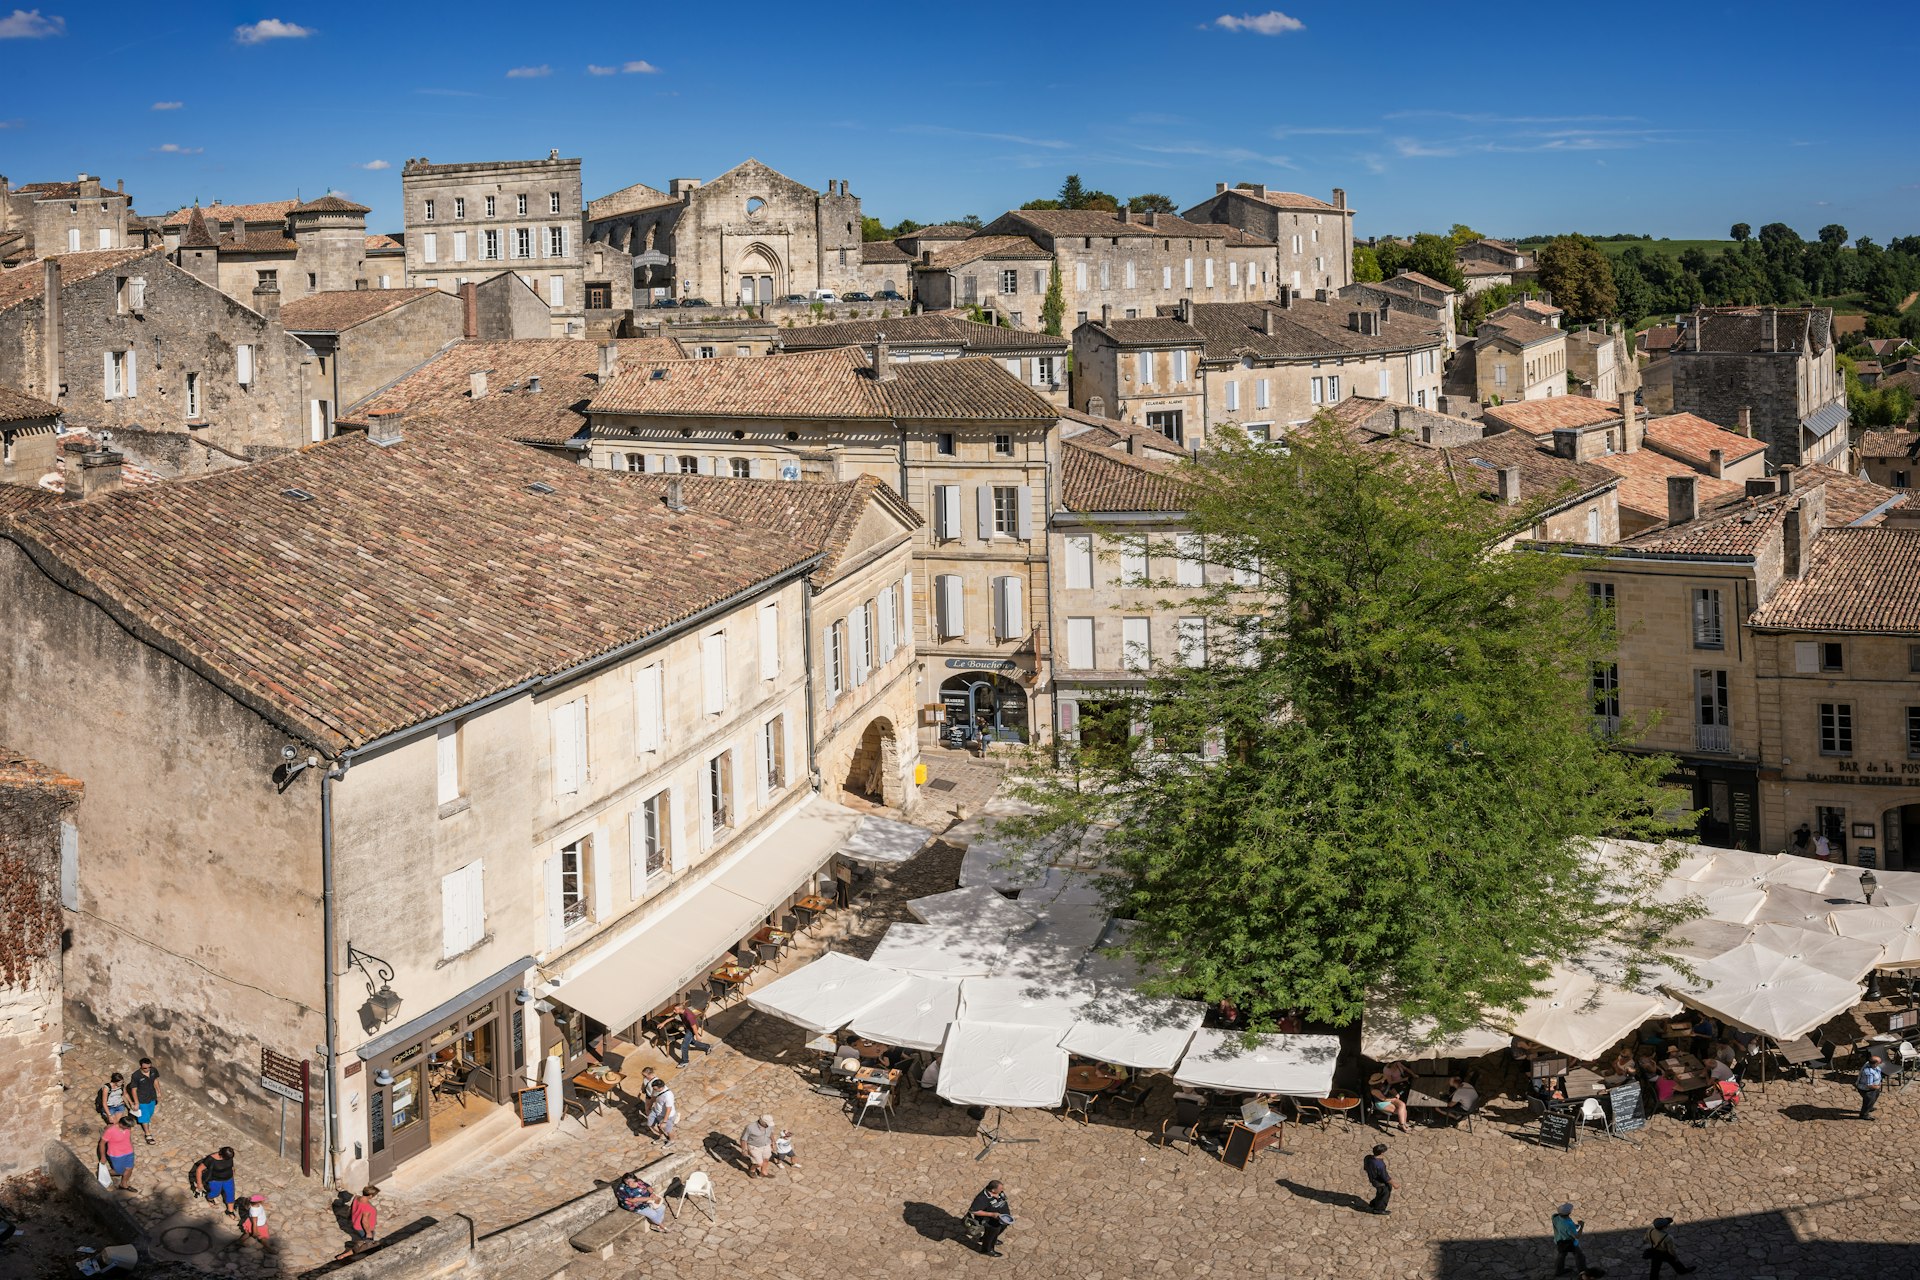 Top view of St Emilion square, a very touristic village in the vineyards of the Bordelais. People are enjoying a meal under umbrellas in the square.